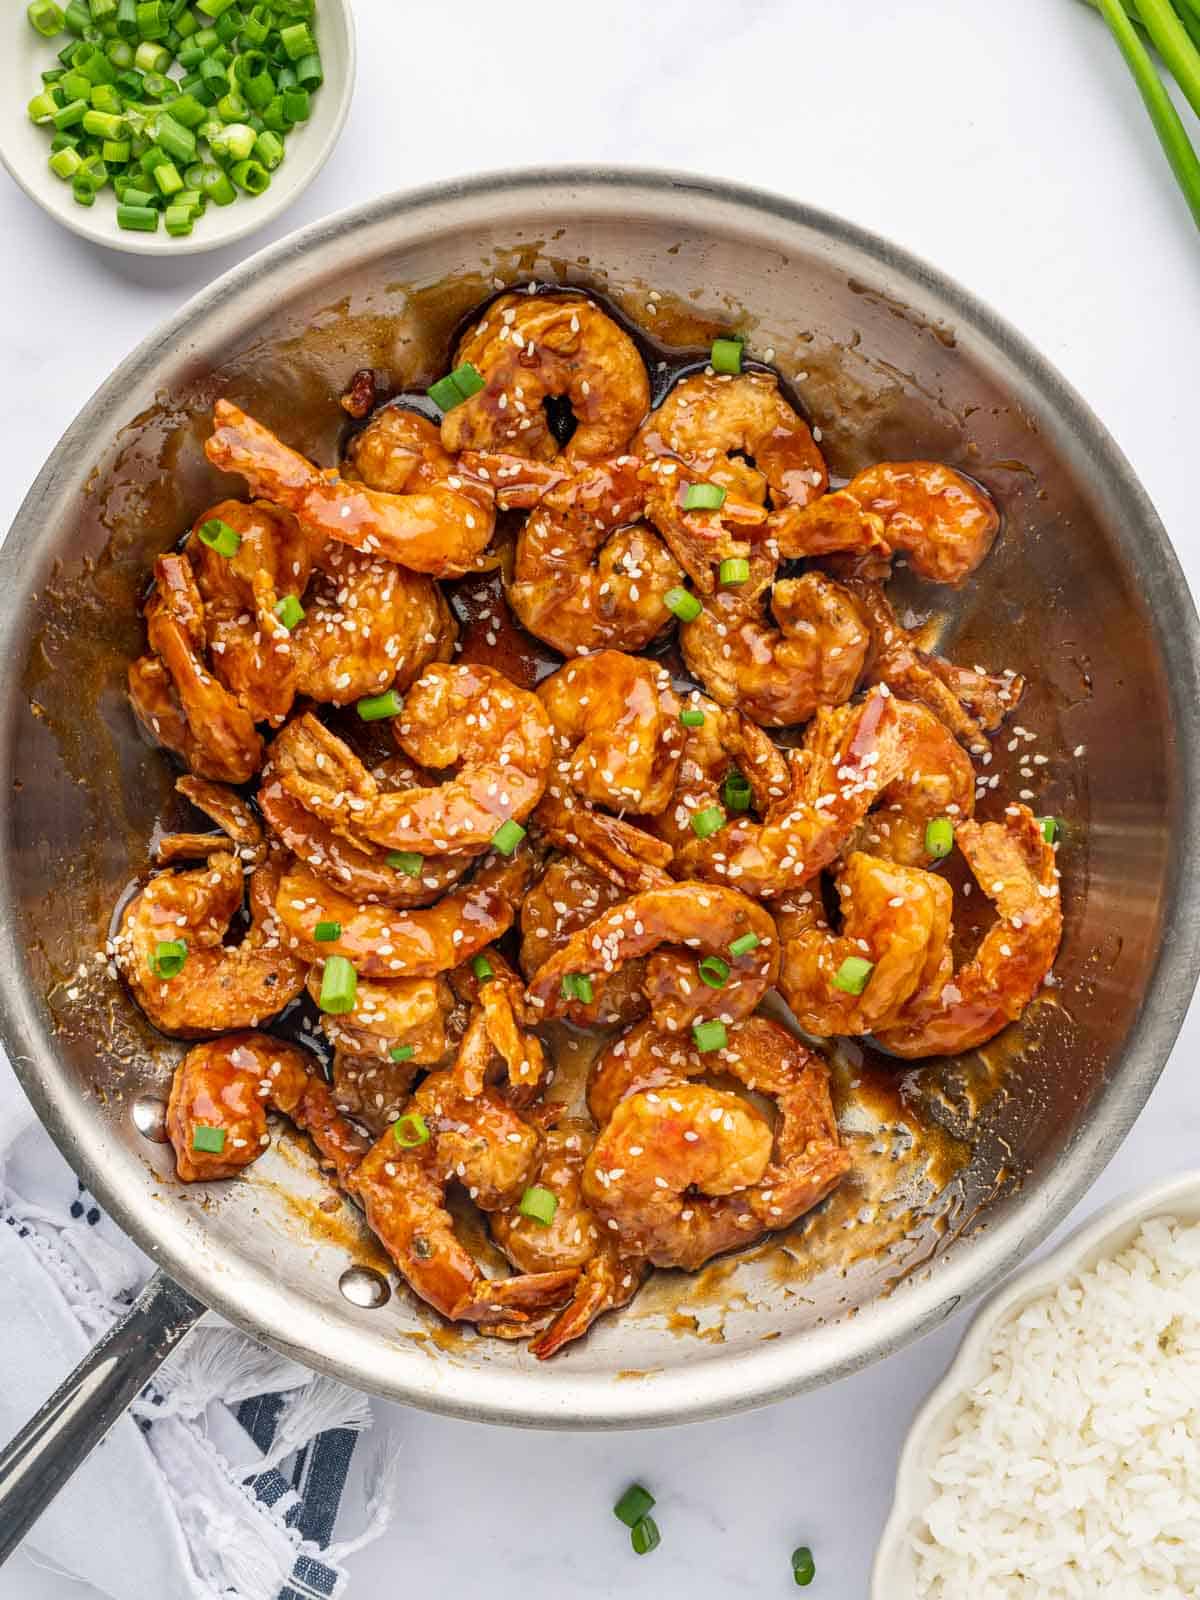 Shrimp in a skillet coated with honey sauce.